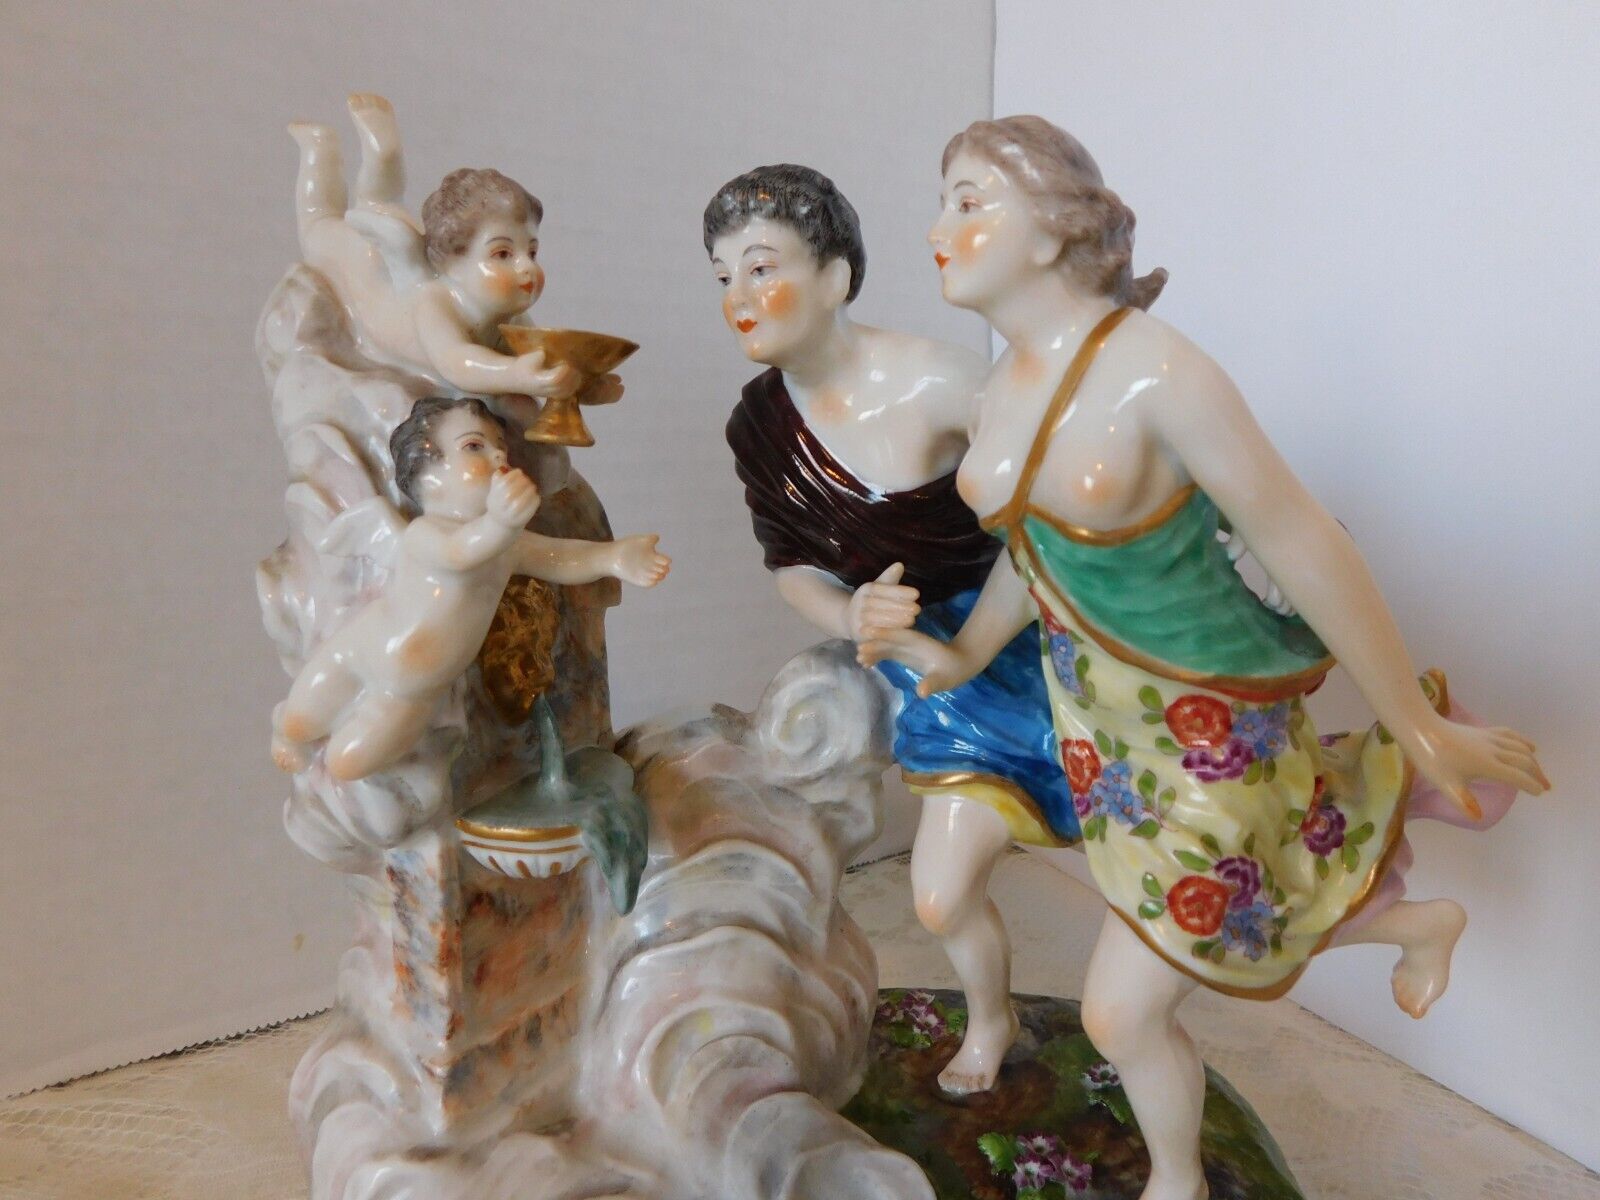 STUNNING PORCELAIN ANTIQUE DRESDEN FIGURE - COUPLE WITH CHERUB ANGELS - GERMANY